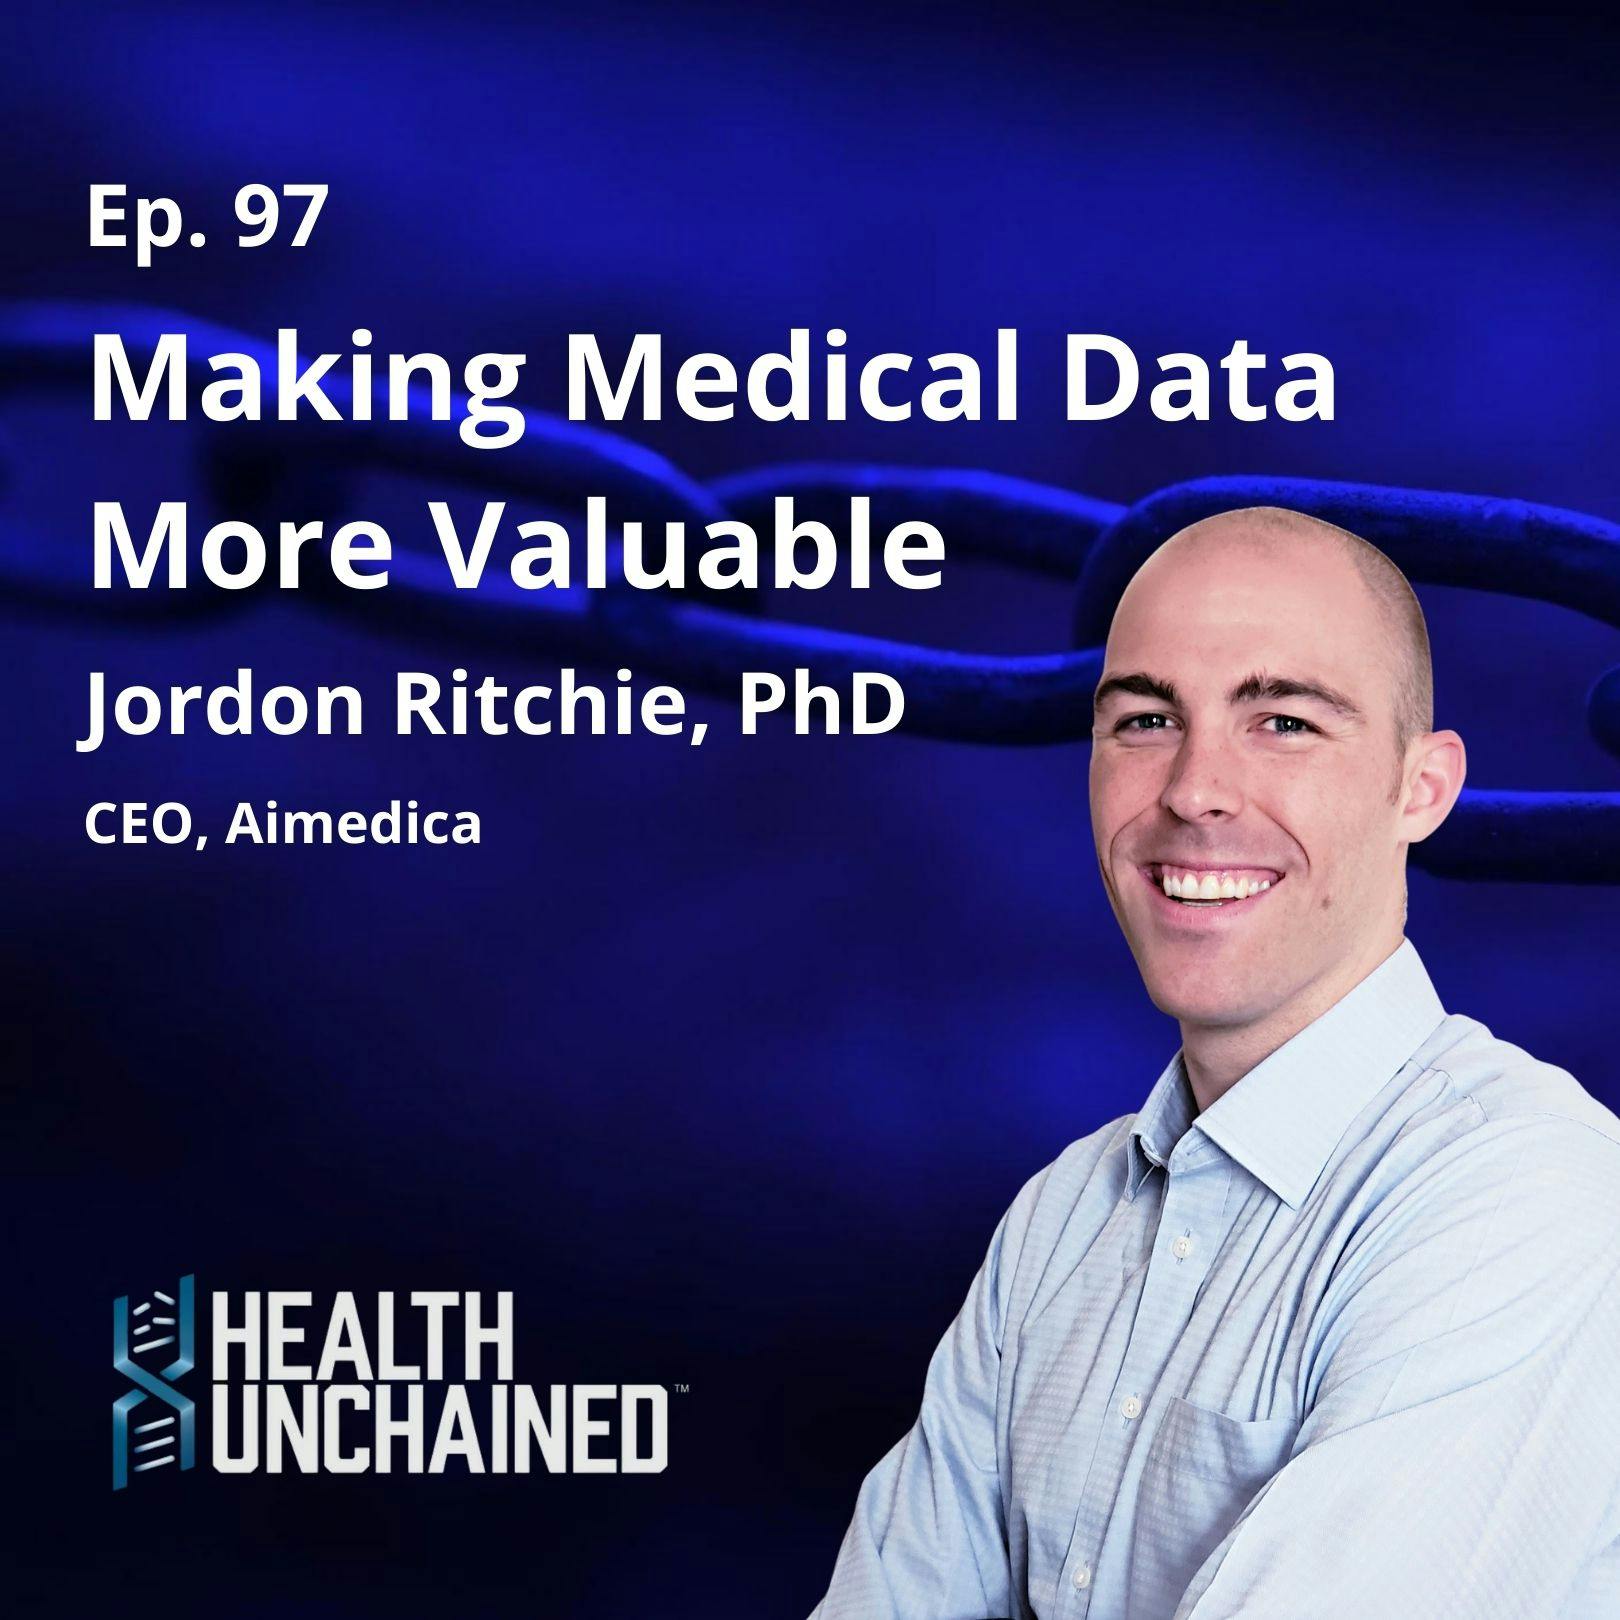 Ep. 97: Making Medical Data More Valuable - Jordon Ritchie, PhD (CEO AiMedica)